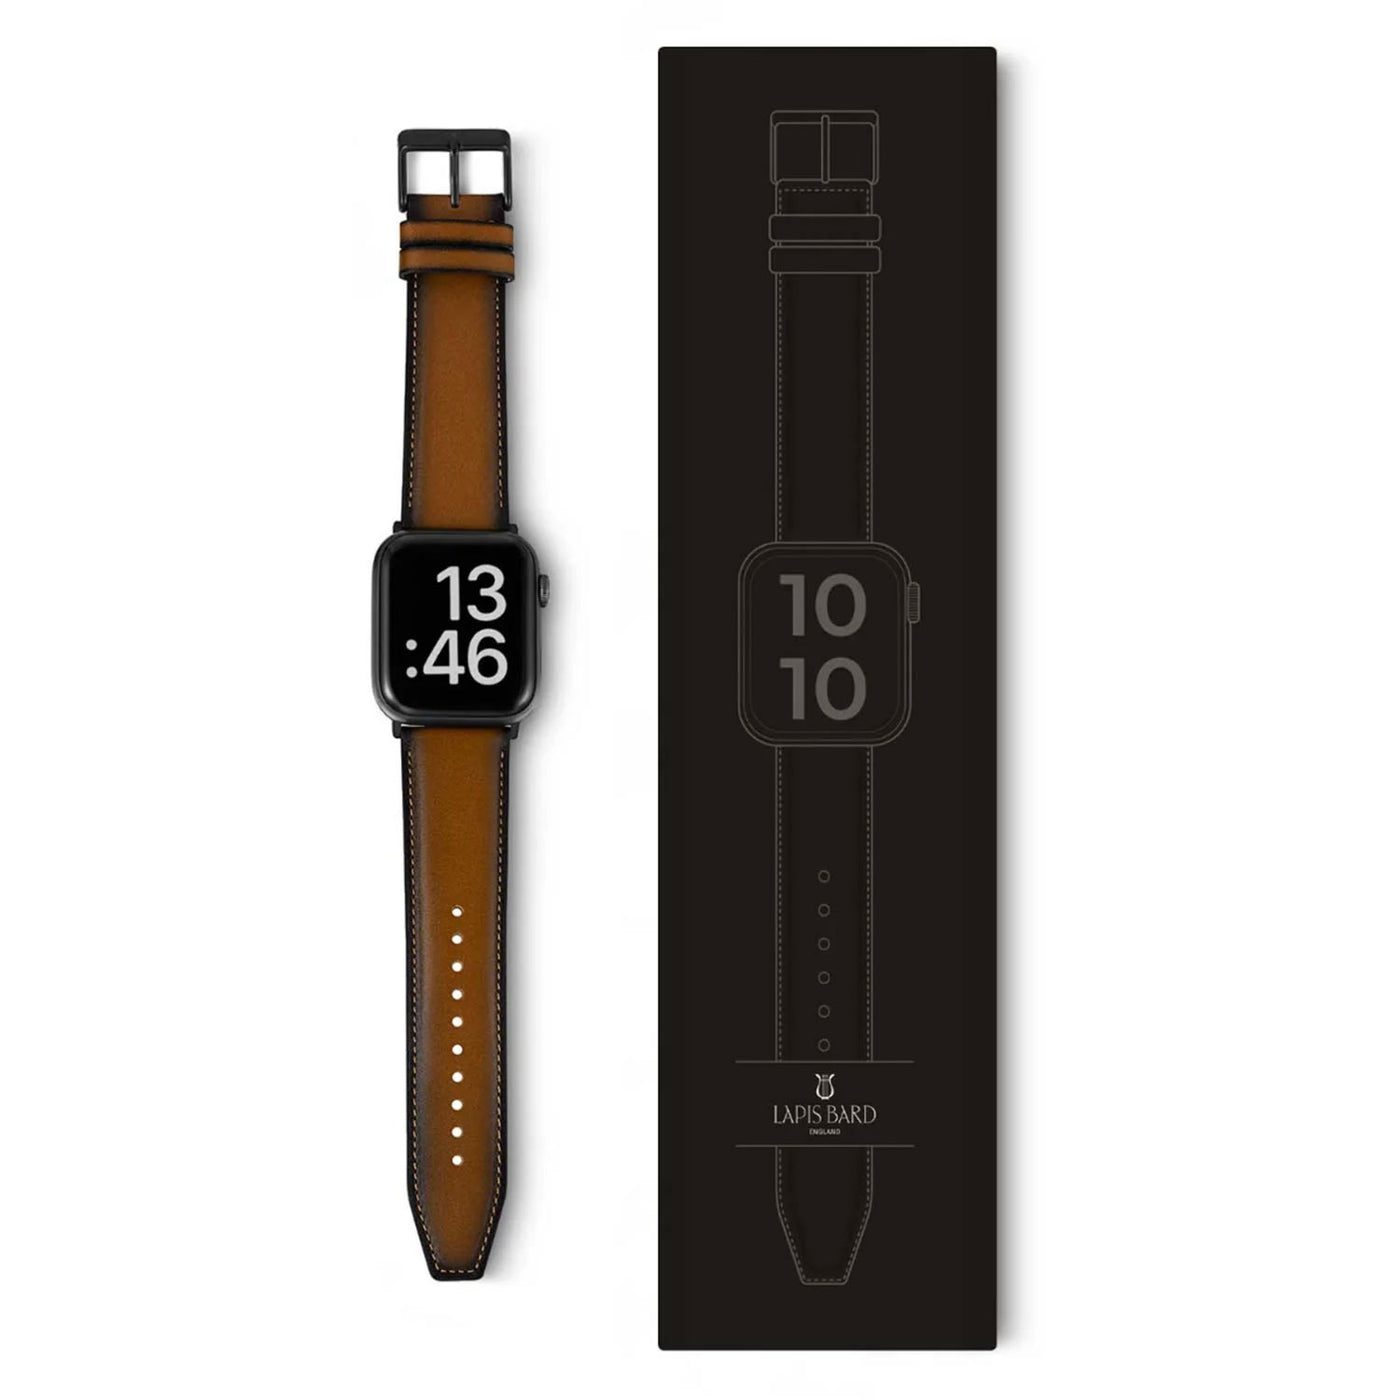 Lapis Bard Leather Apple Watch Strap Brown 4